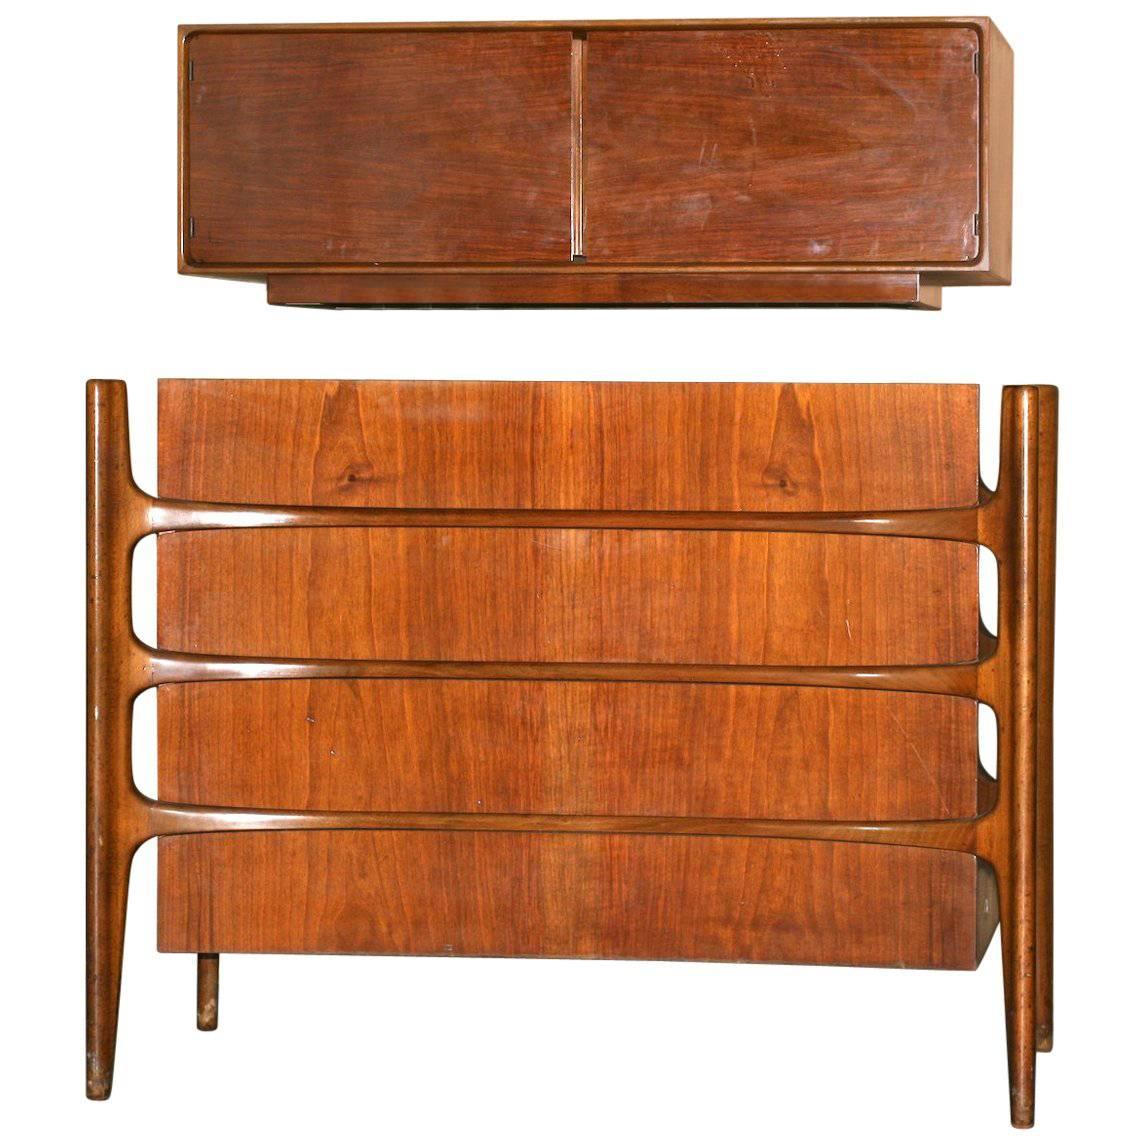 William Hinn Chest Of Drawers Cabinet